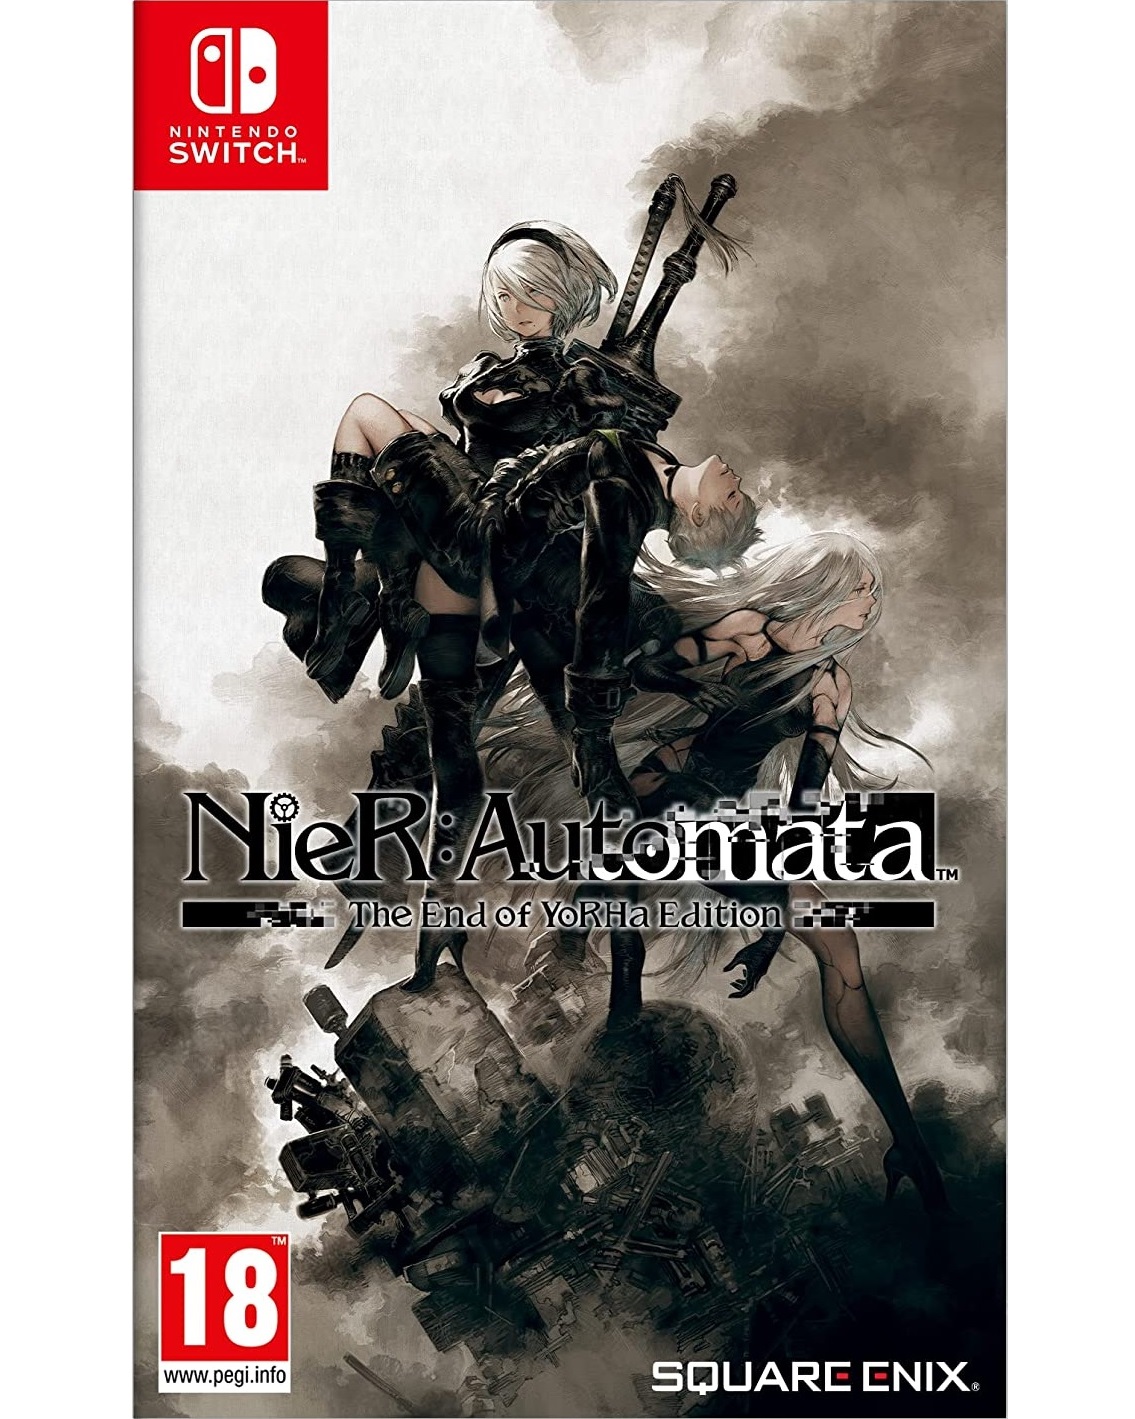 Nier Automata The End of YoRHa Edition - Switch